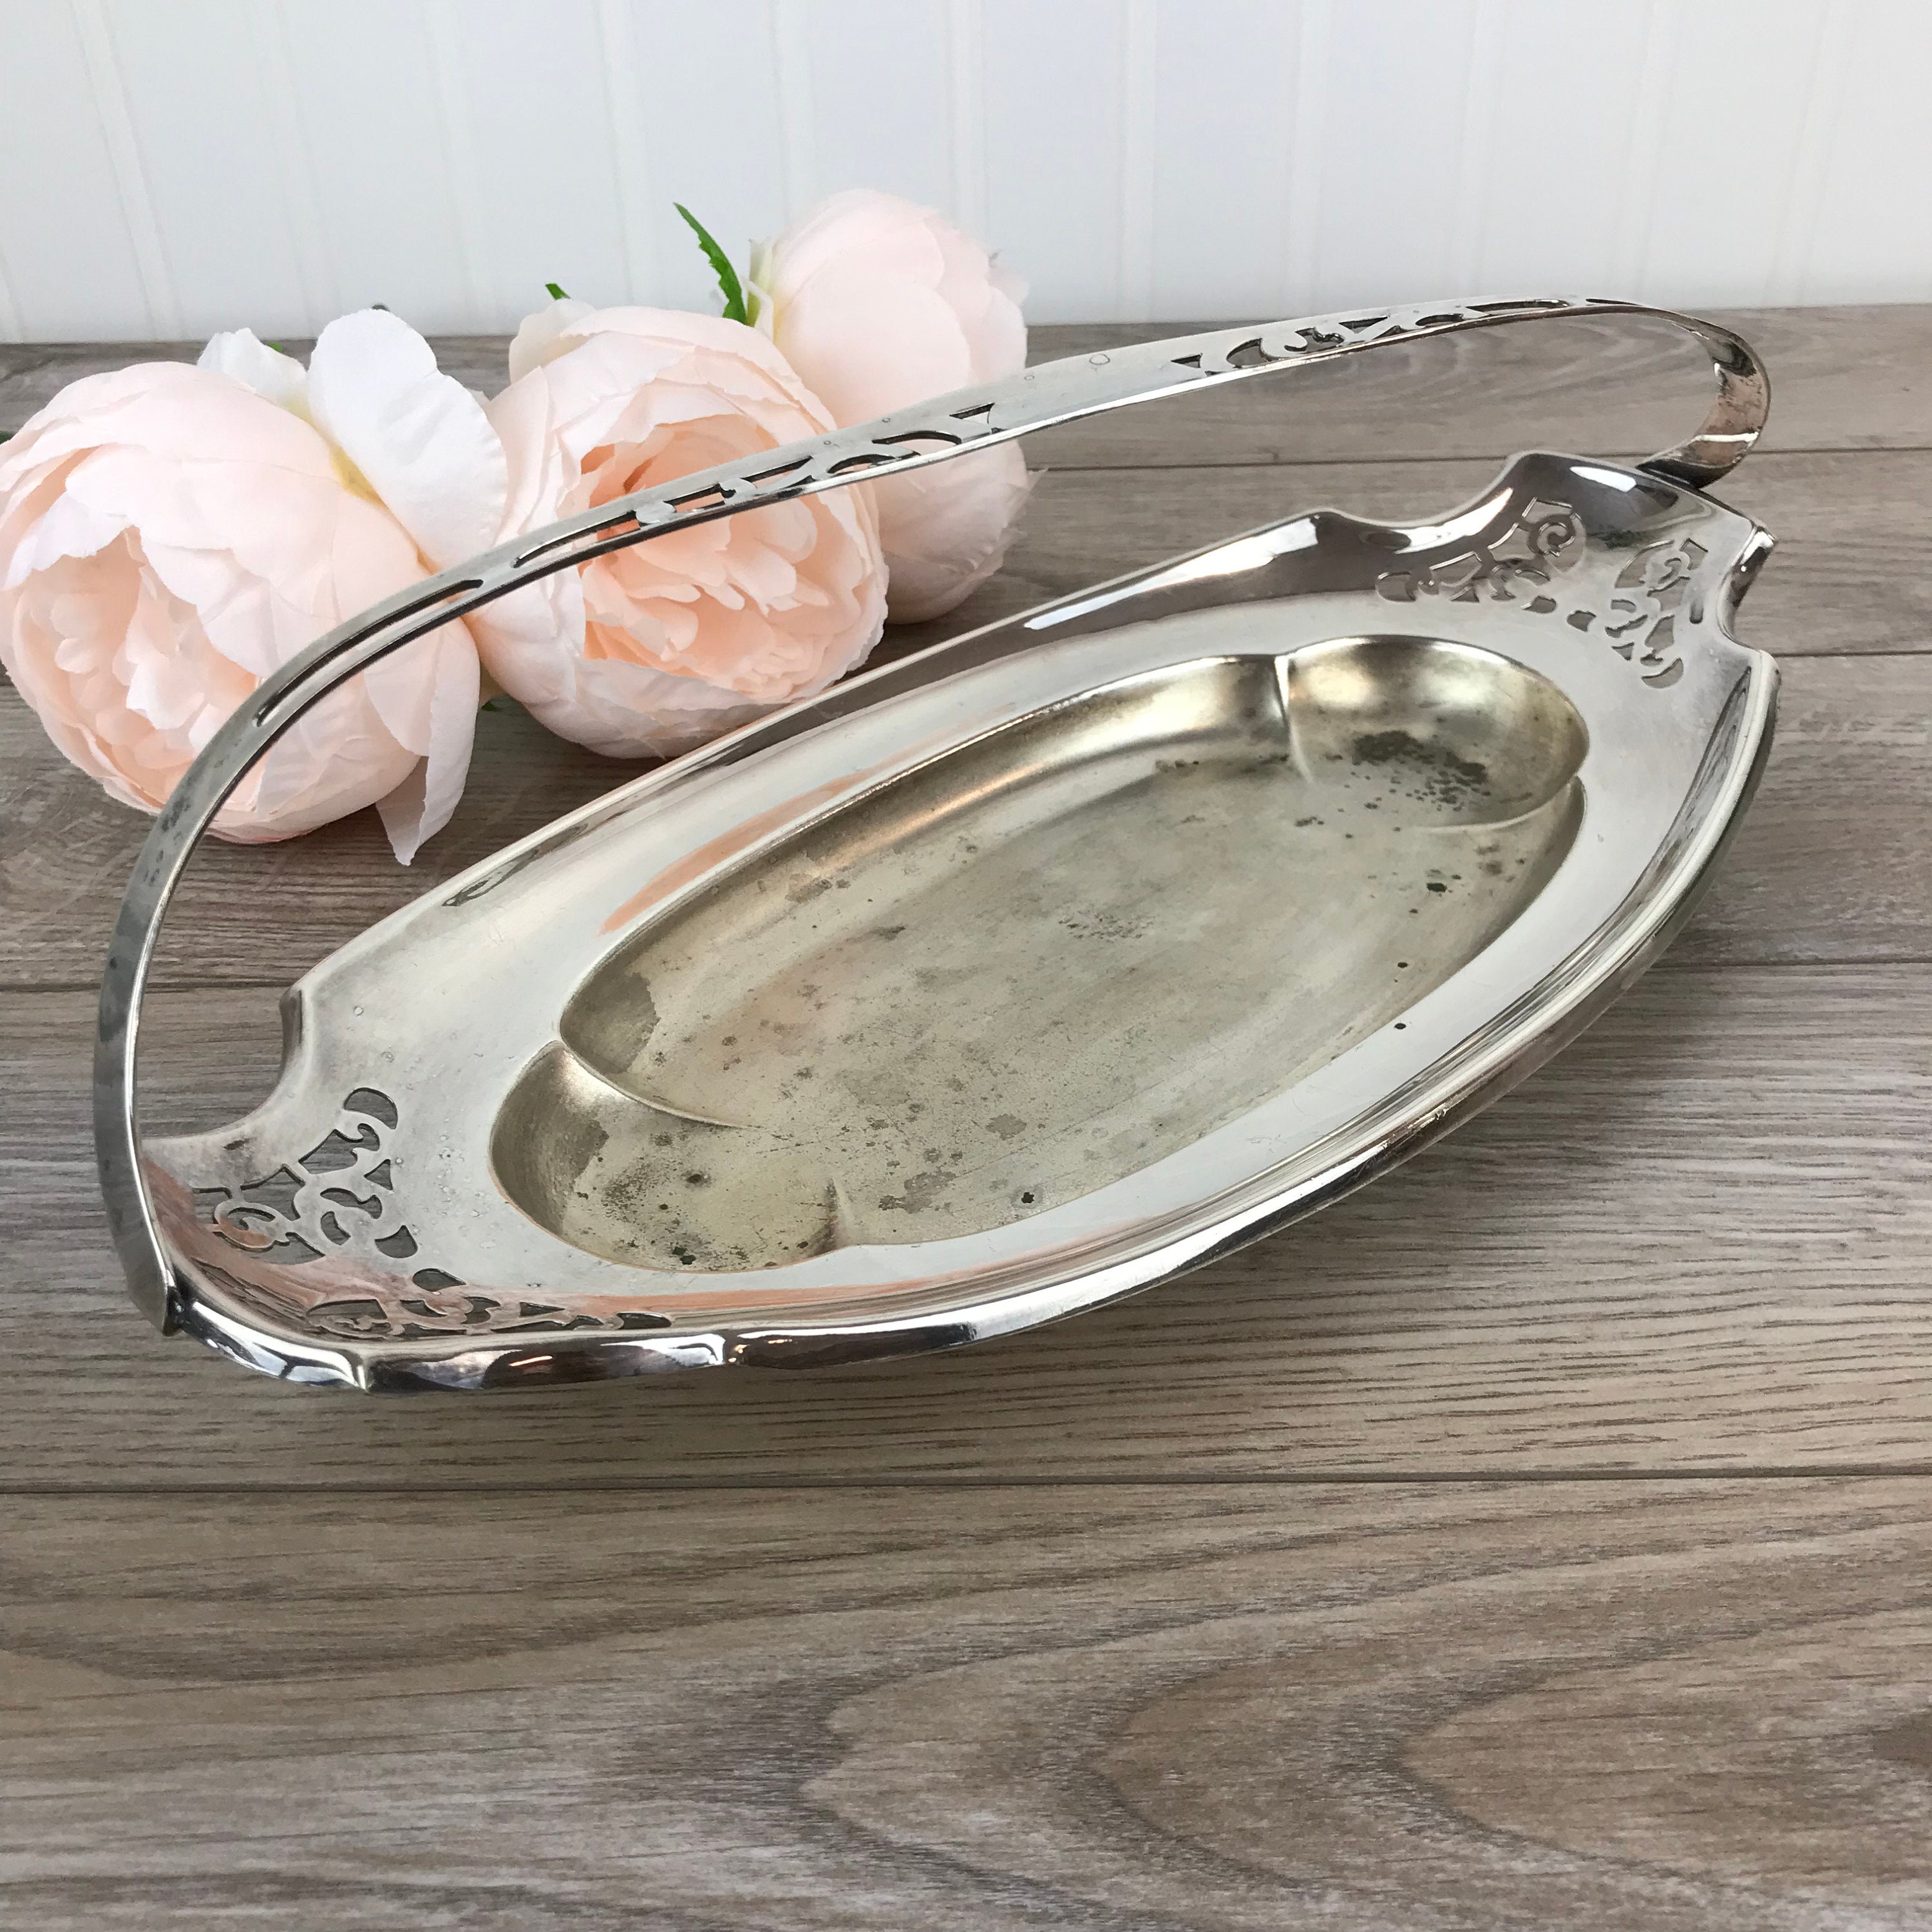 Decorative Silver Metal Oval Tray With Handles Online